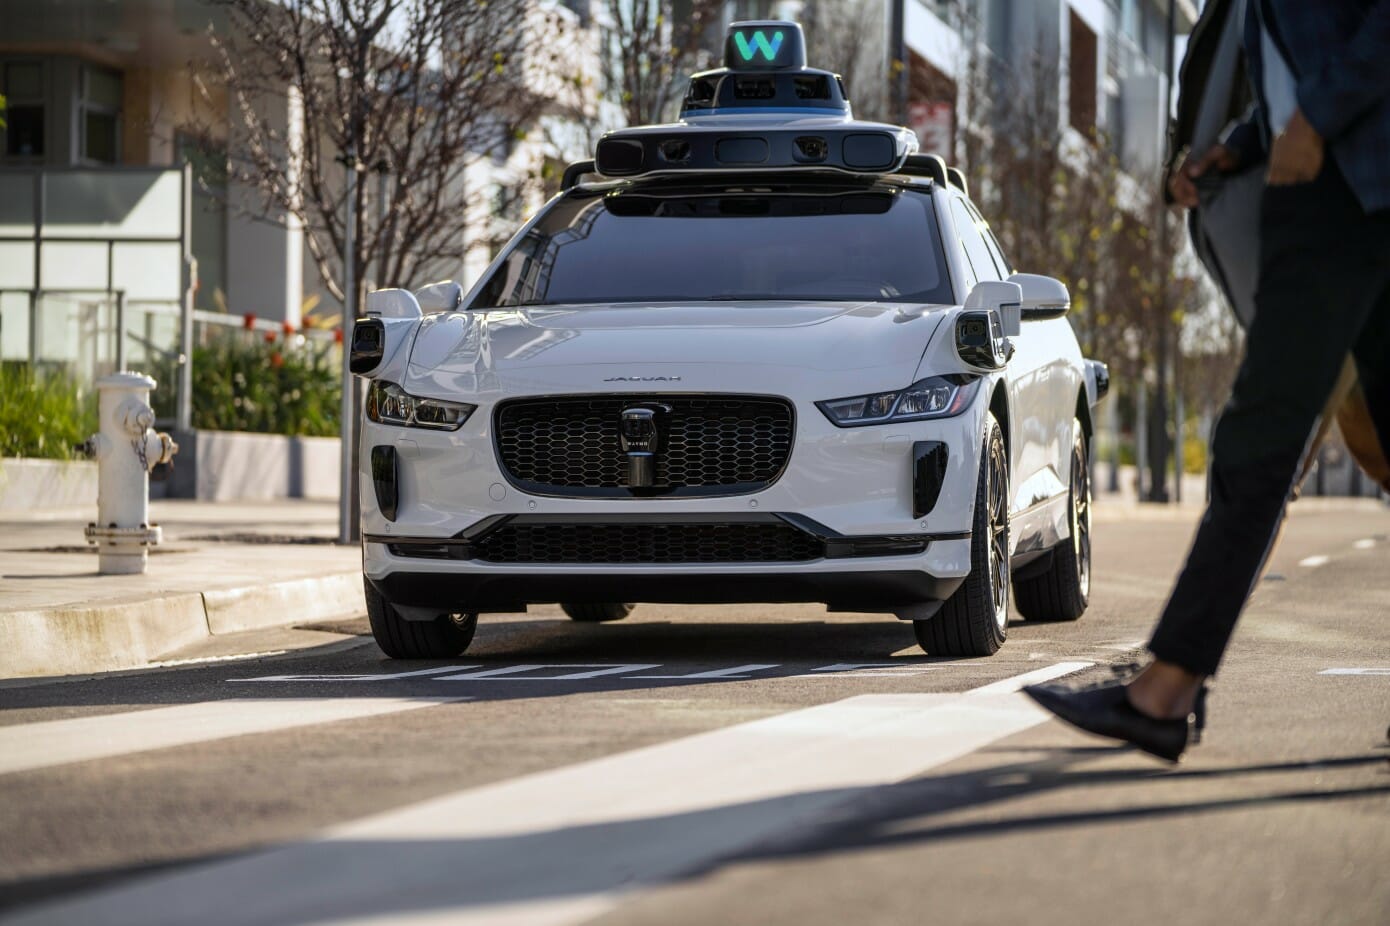 Phoenix can now experience Uber Eats delivery with Waymo Driver